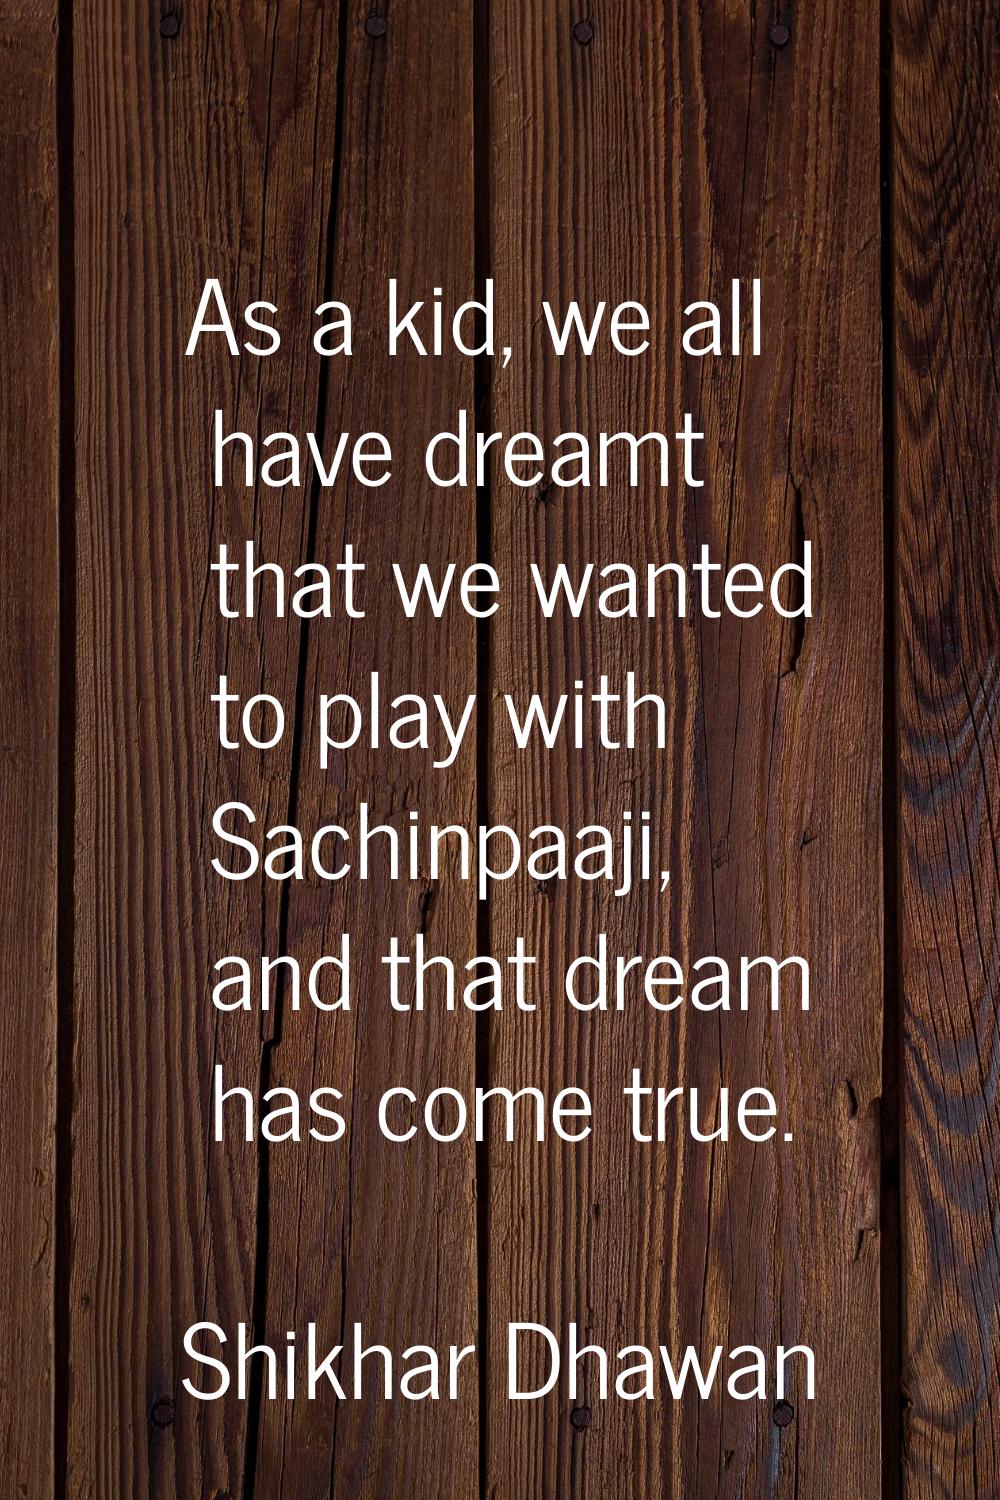 As a kid, we all have dreamt that we wanted to play with Sachinpaaji, and that dream has come true.